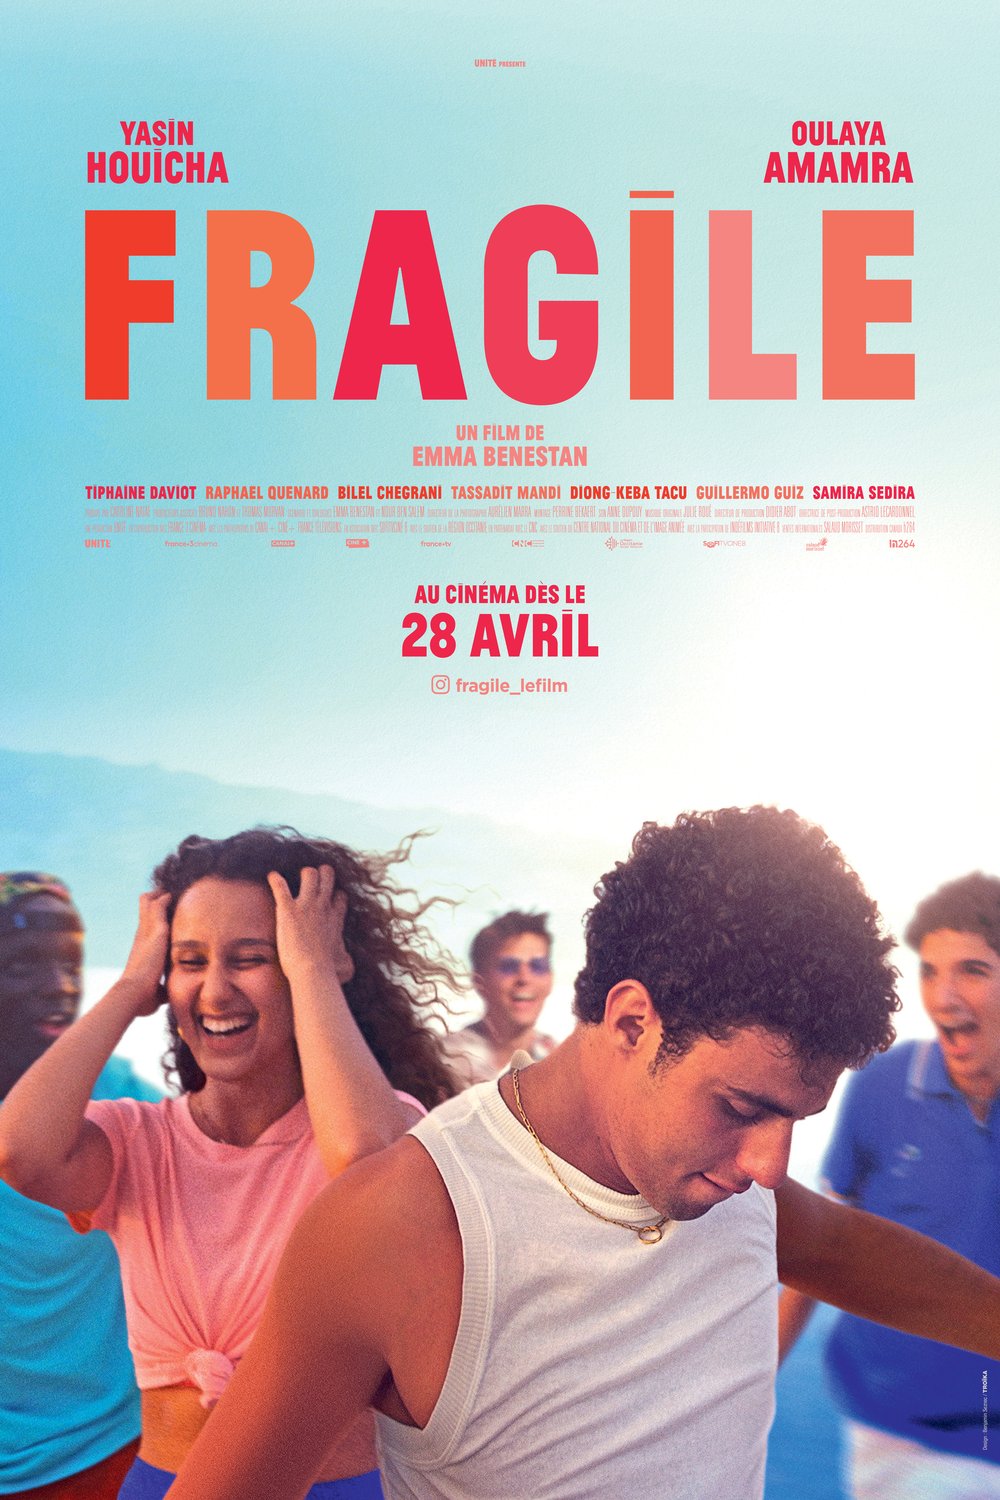 Poster of the movie Fragile